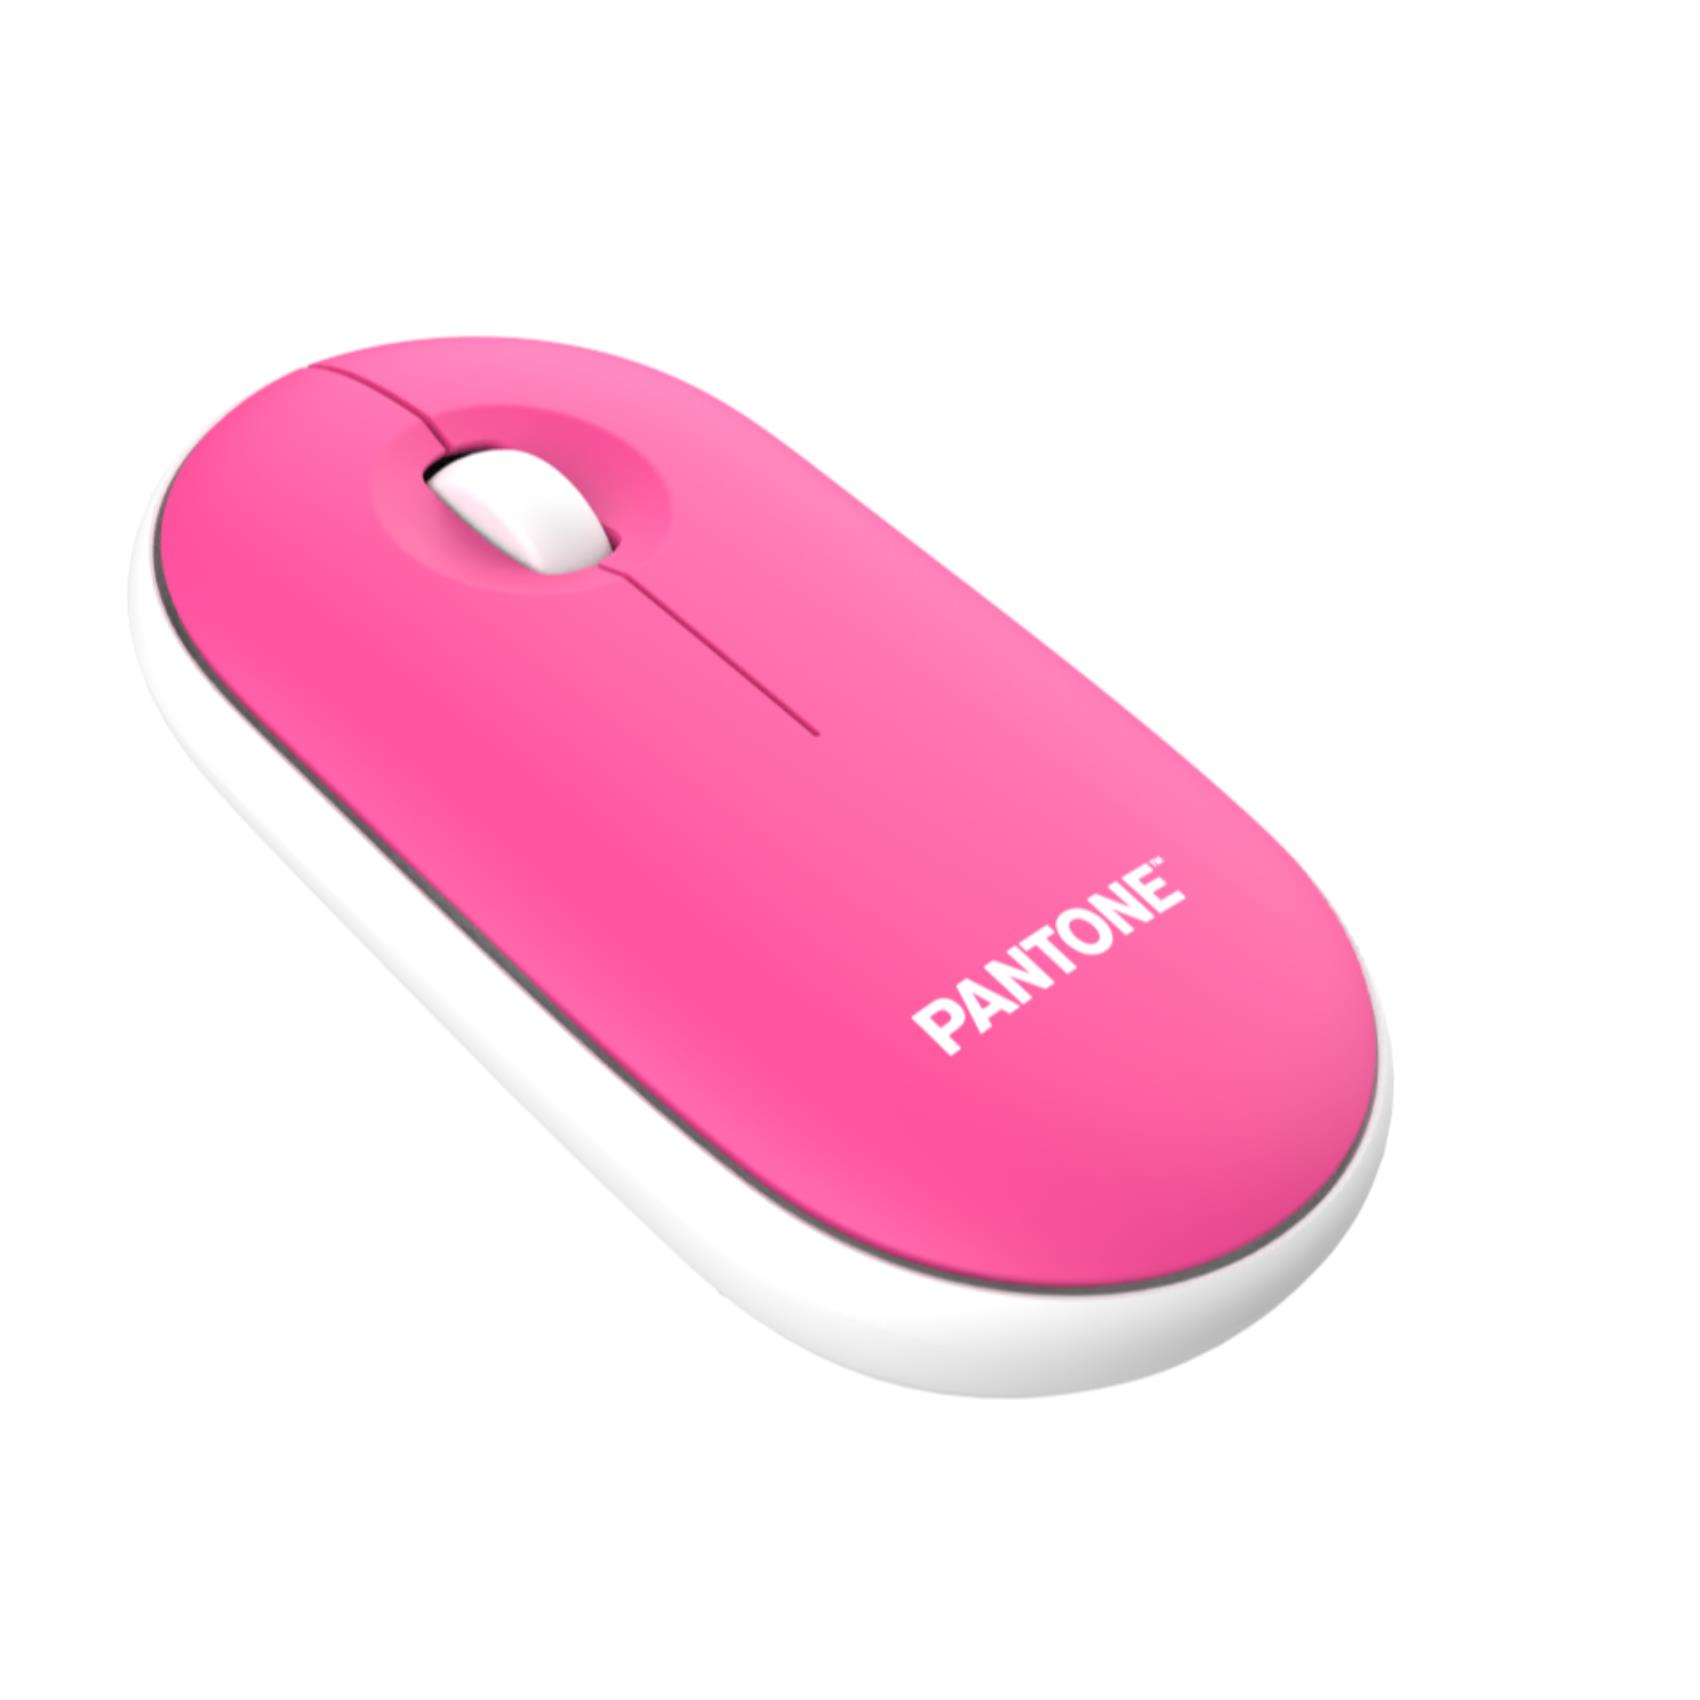 PANTONE MOUSE CON DONGLE PINK